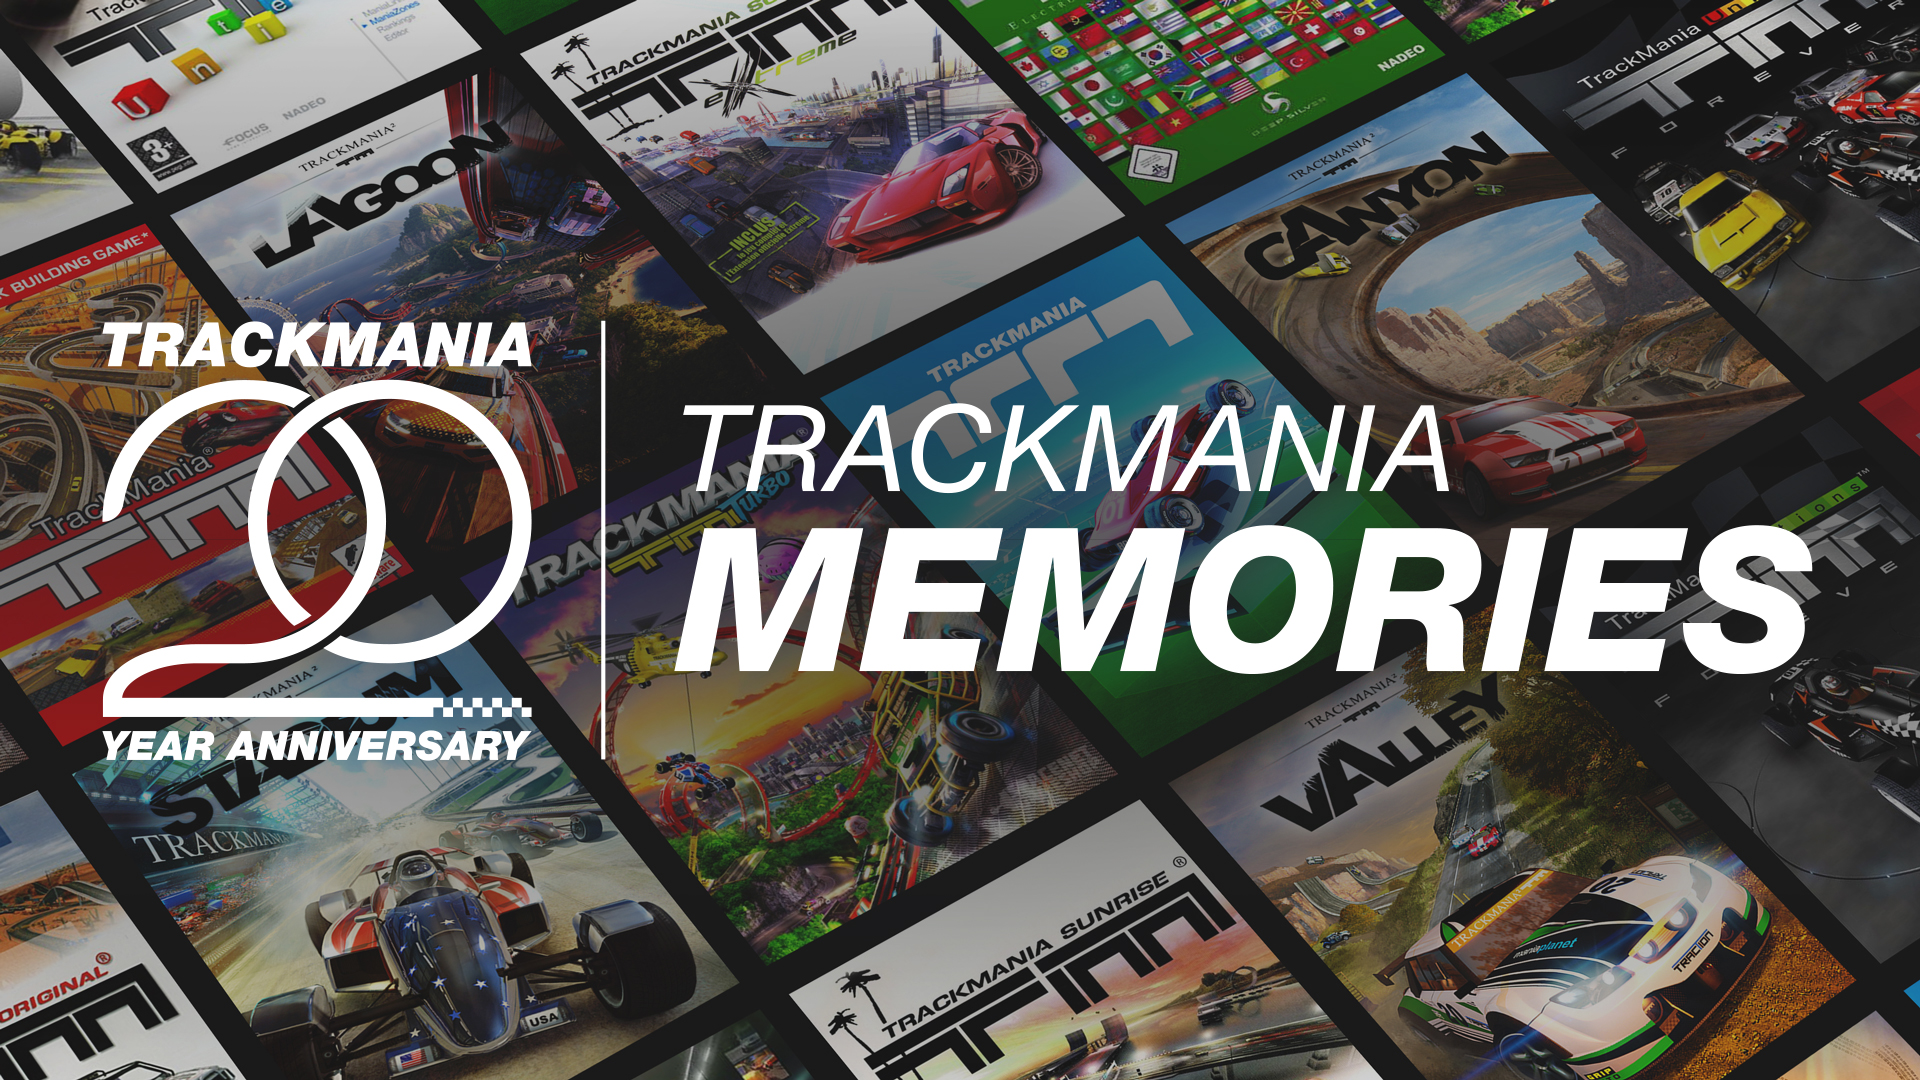 Share your Trackmania memories with us!